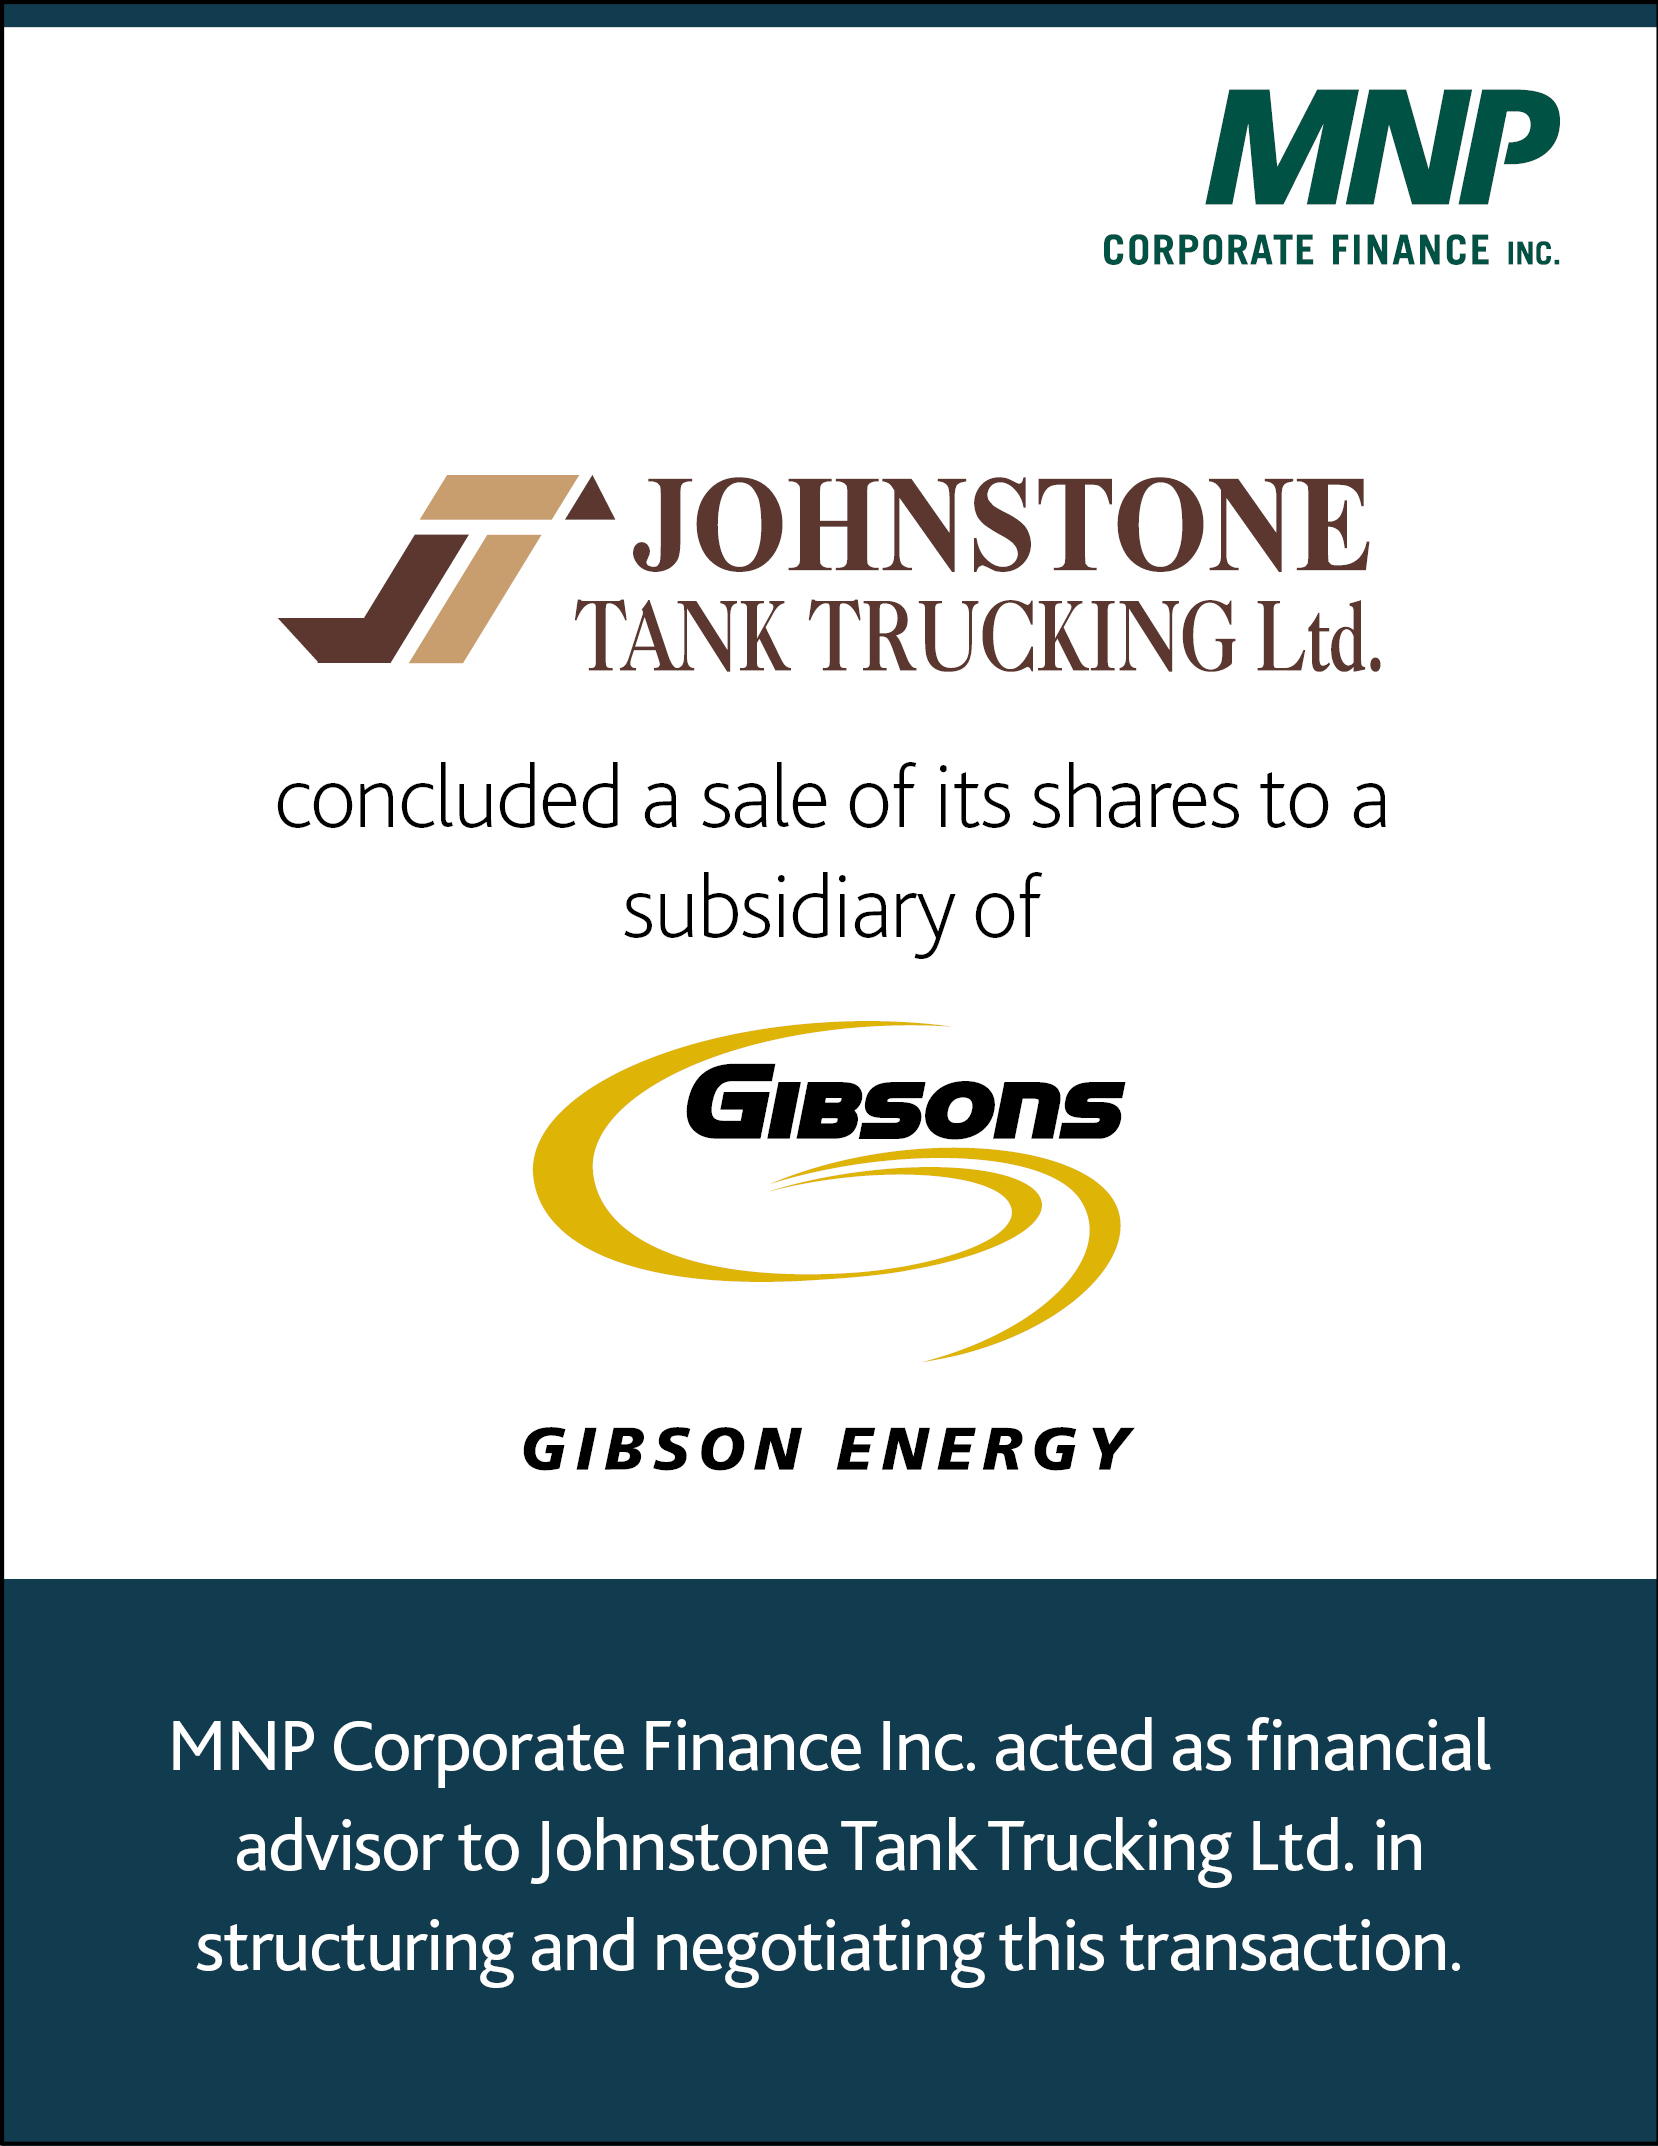 Johnstone Tank Trucking Ltd concluded a sale of its shares to subsidiary of Gibson Energy